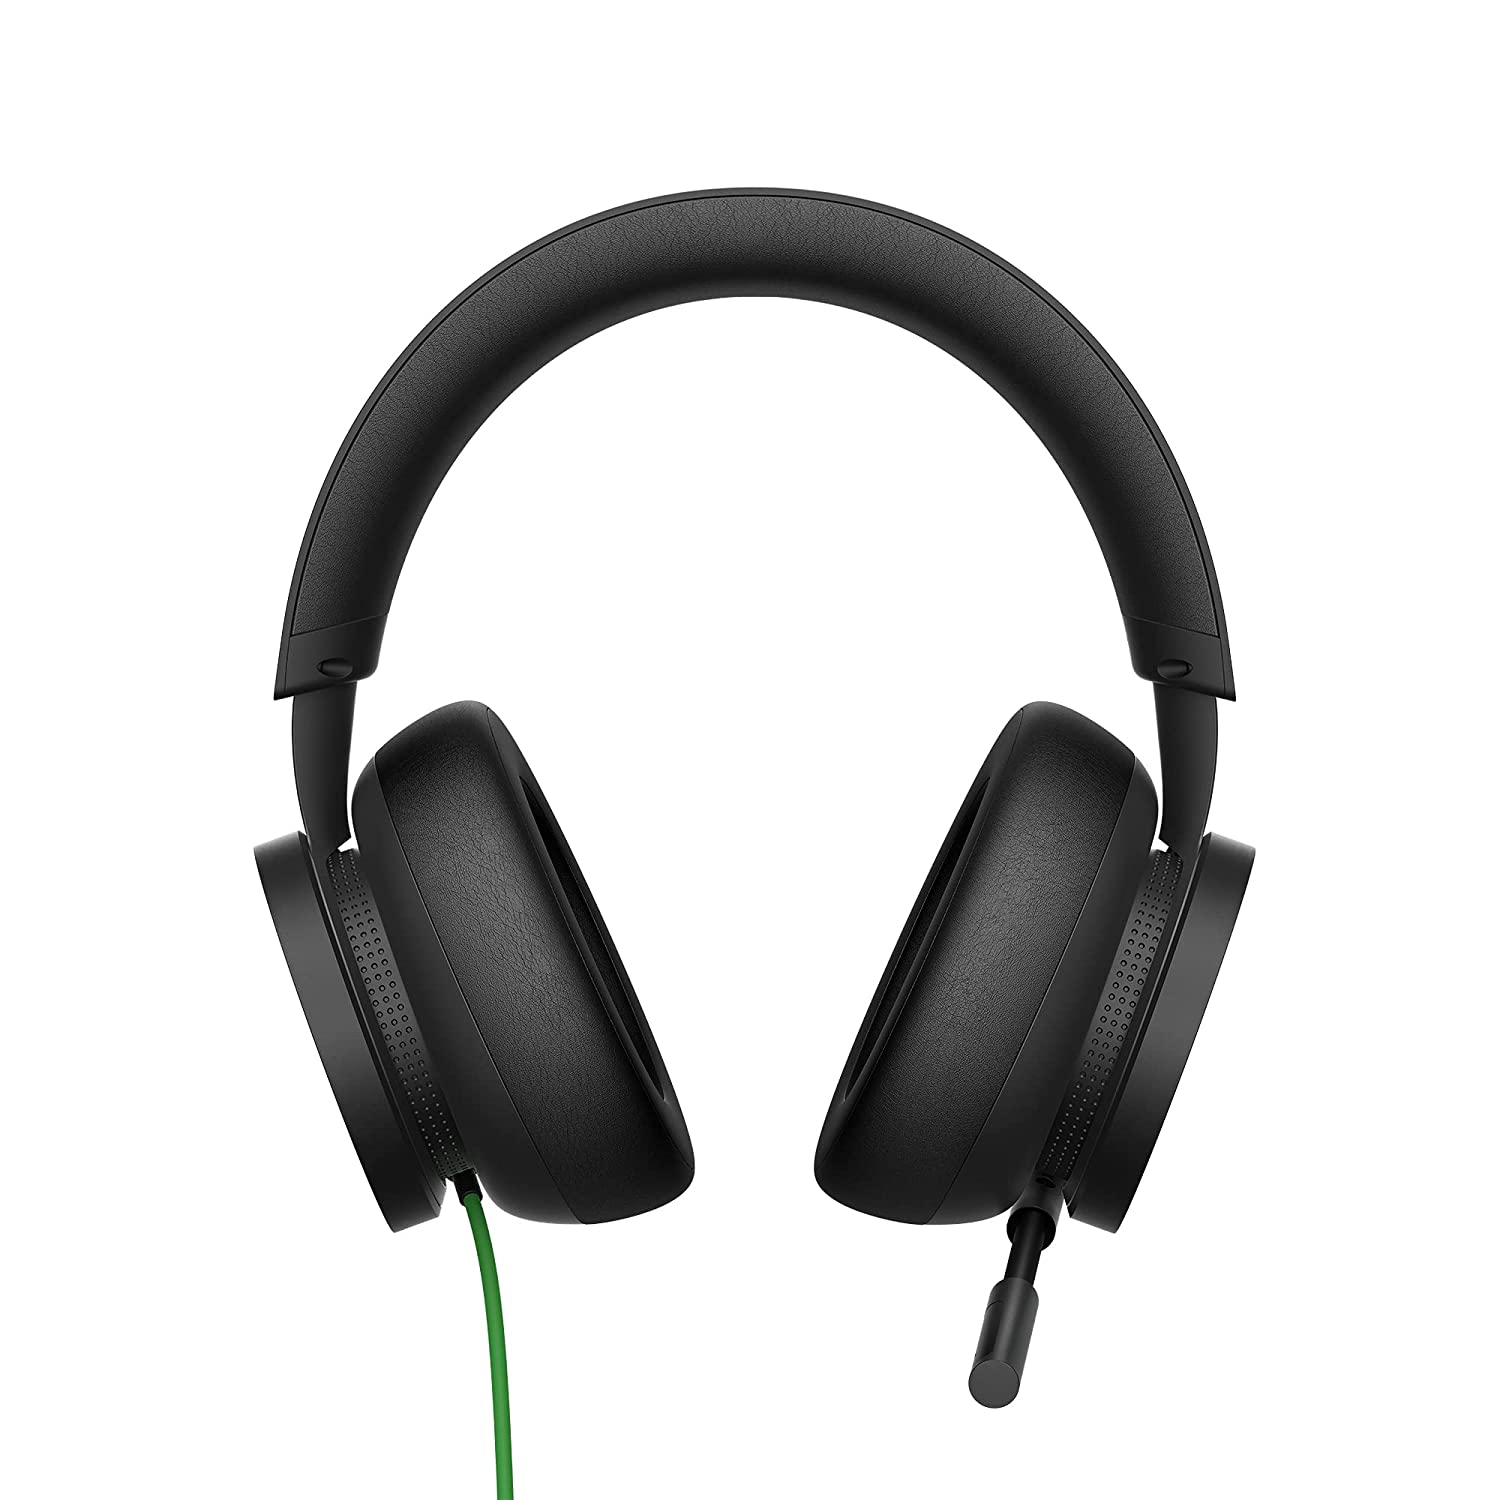 Xbox Stereo Headset: New gaming headphones are coming